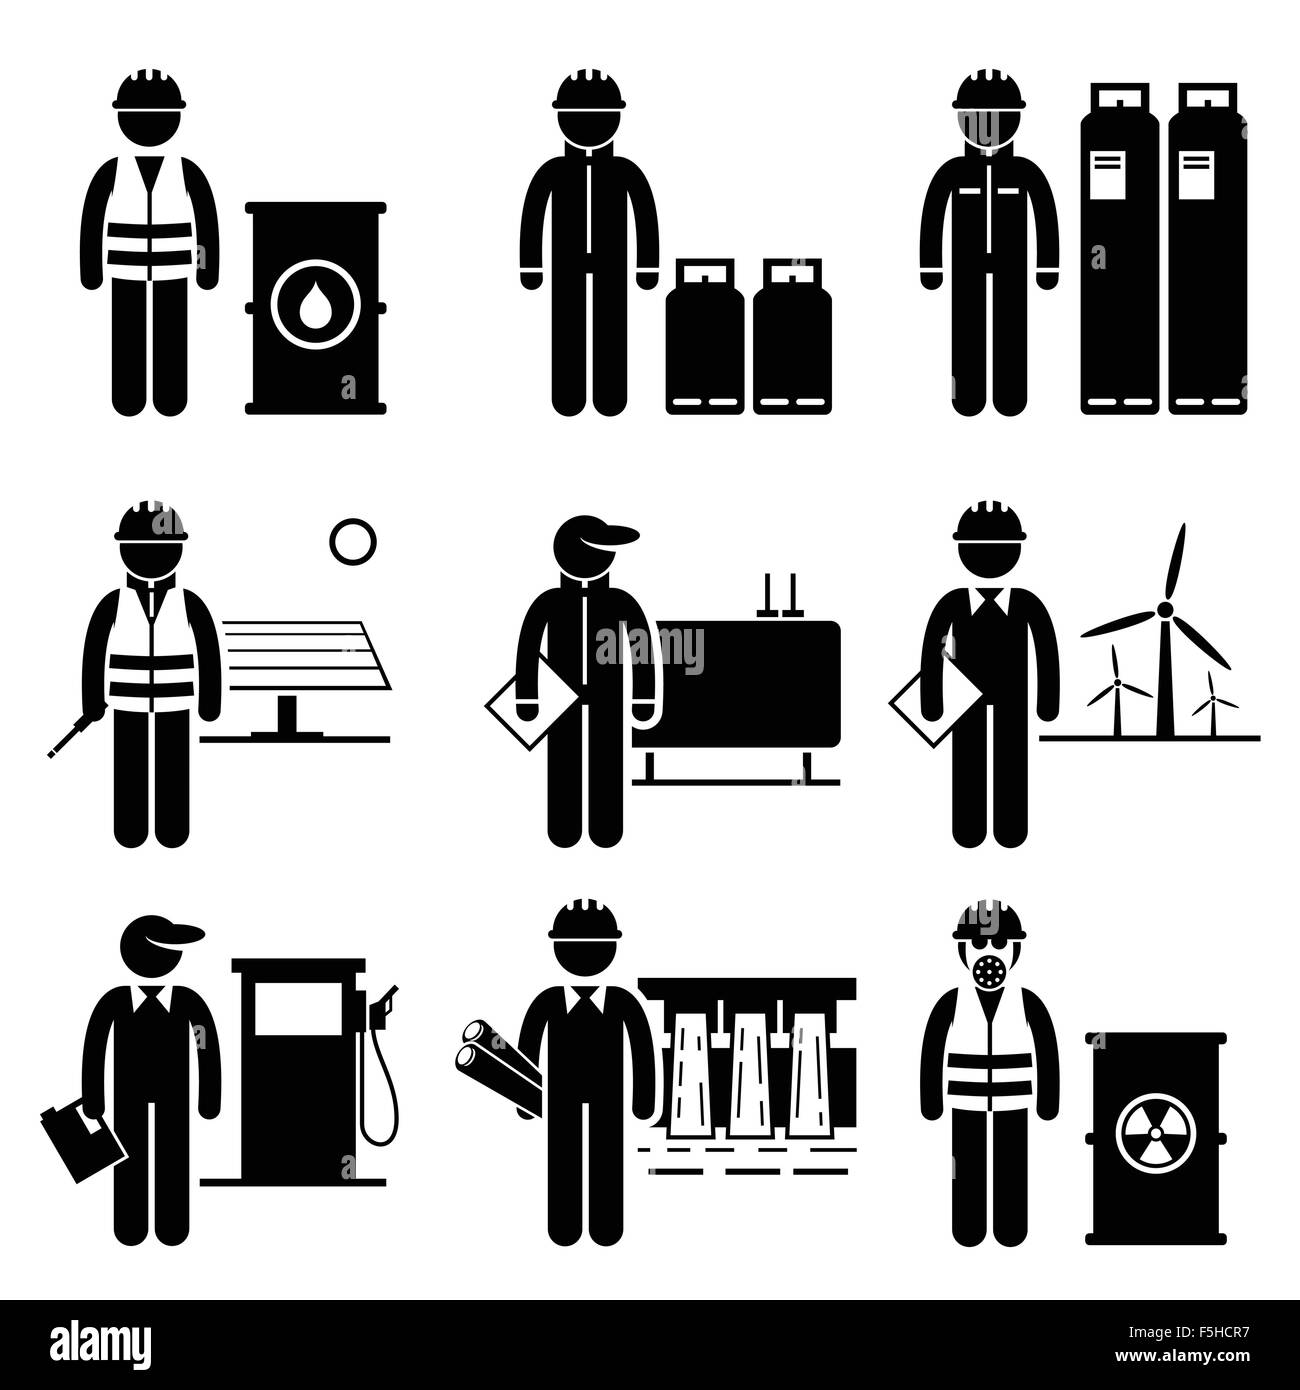 Commodities Energy Fuel Power Stick Figure Pictogram Icons Stock Vector